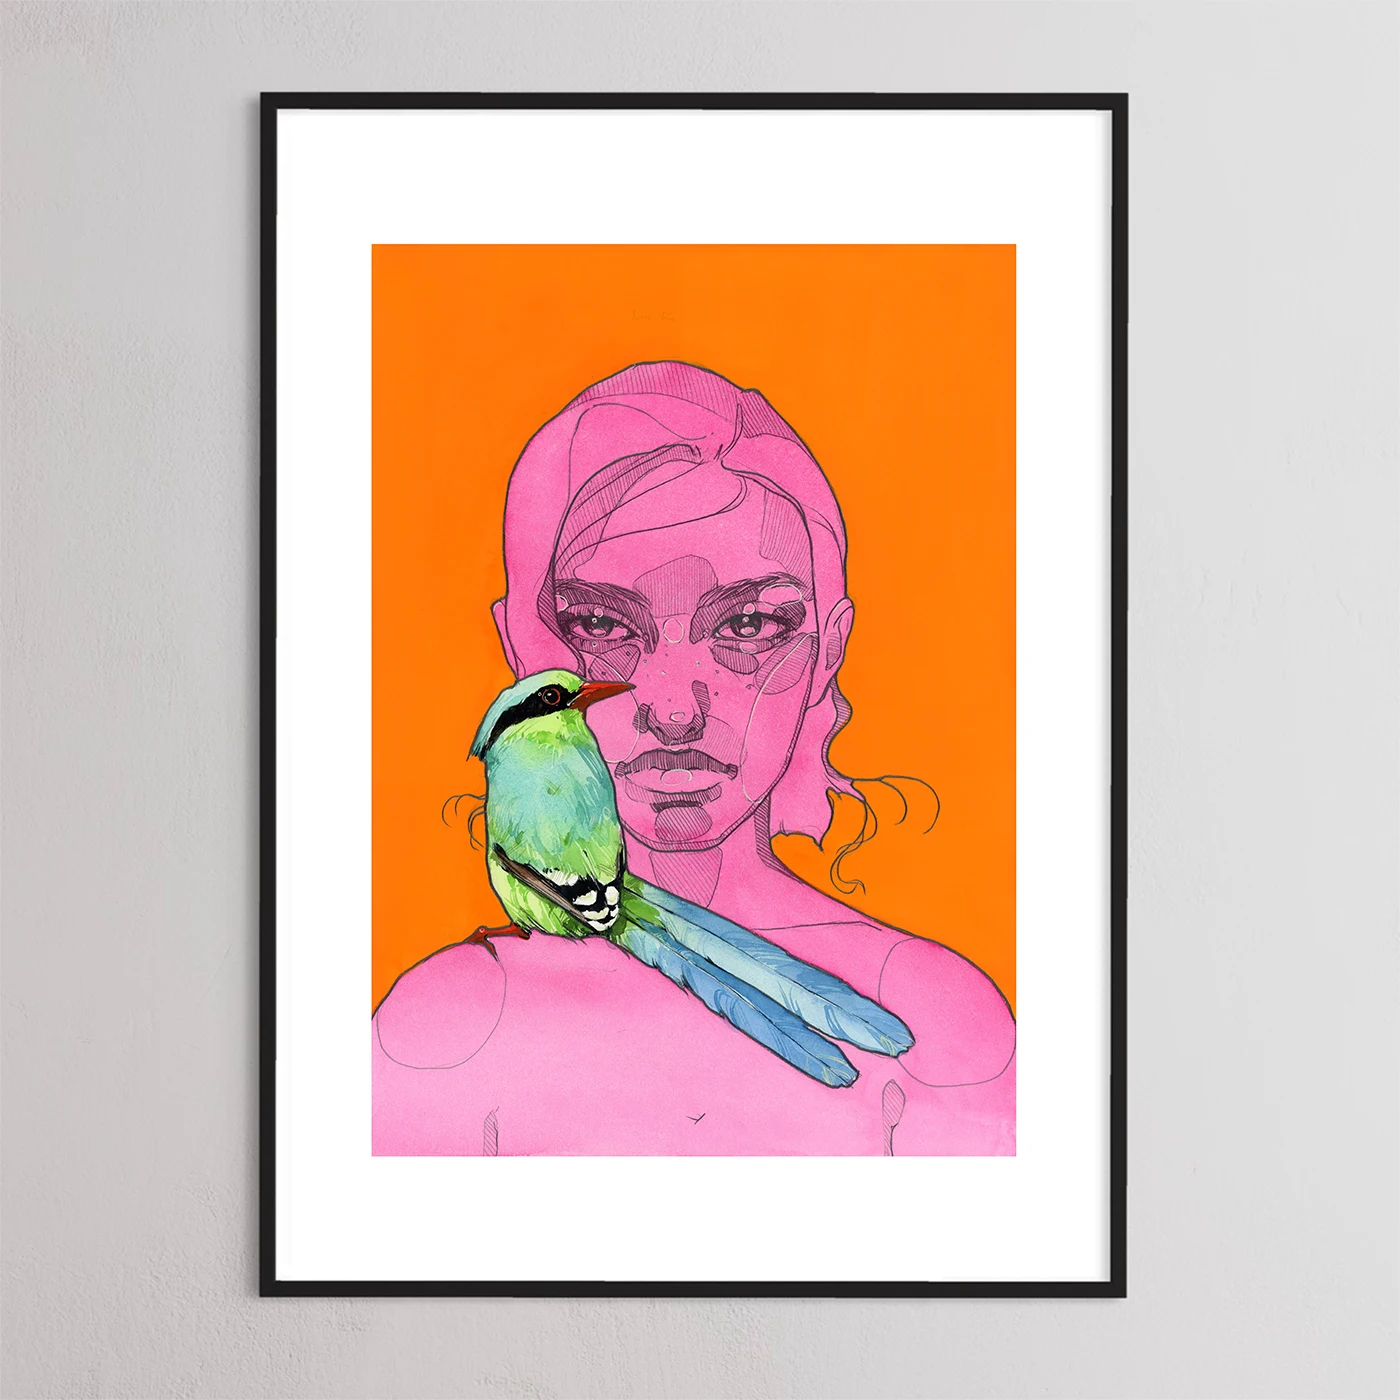 Green magpie print from the Gradient collection by Polina Bright